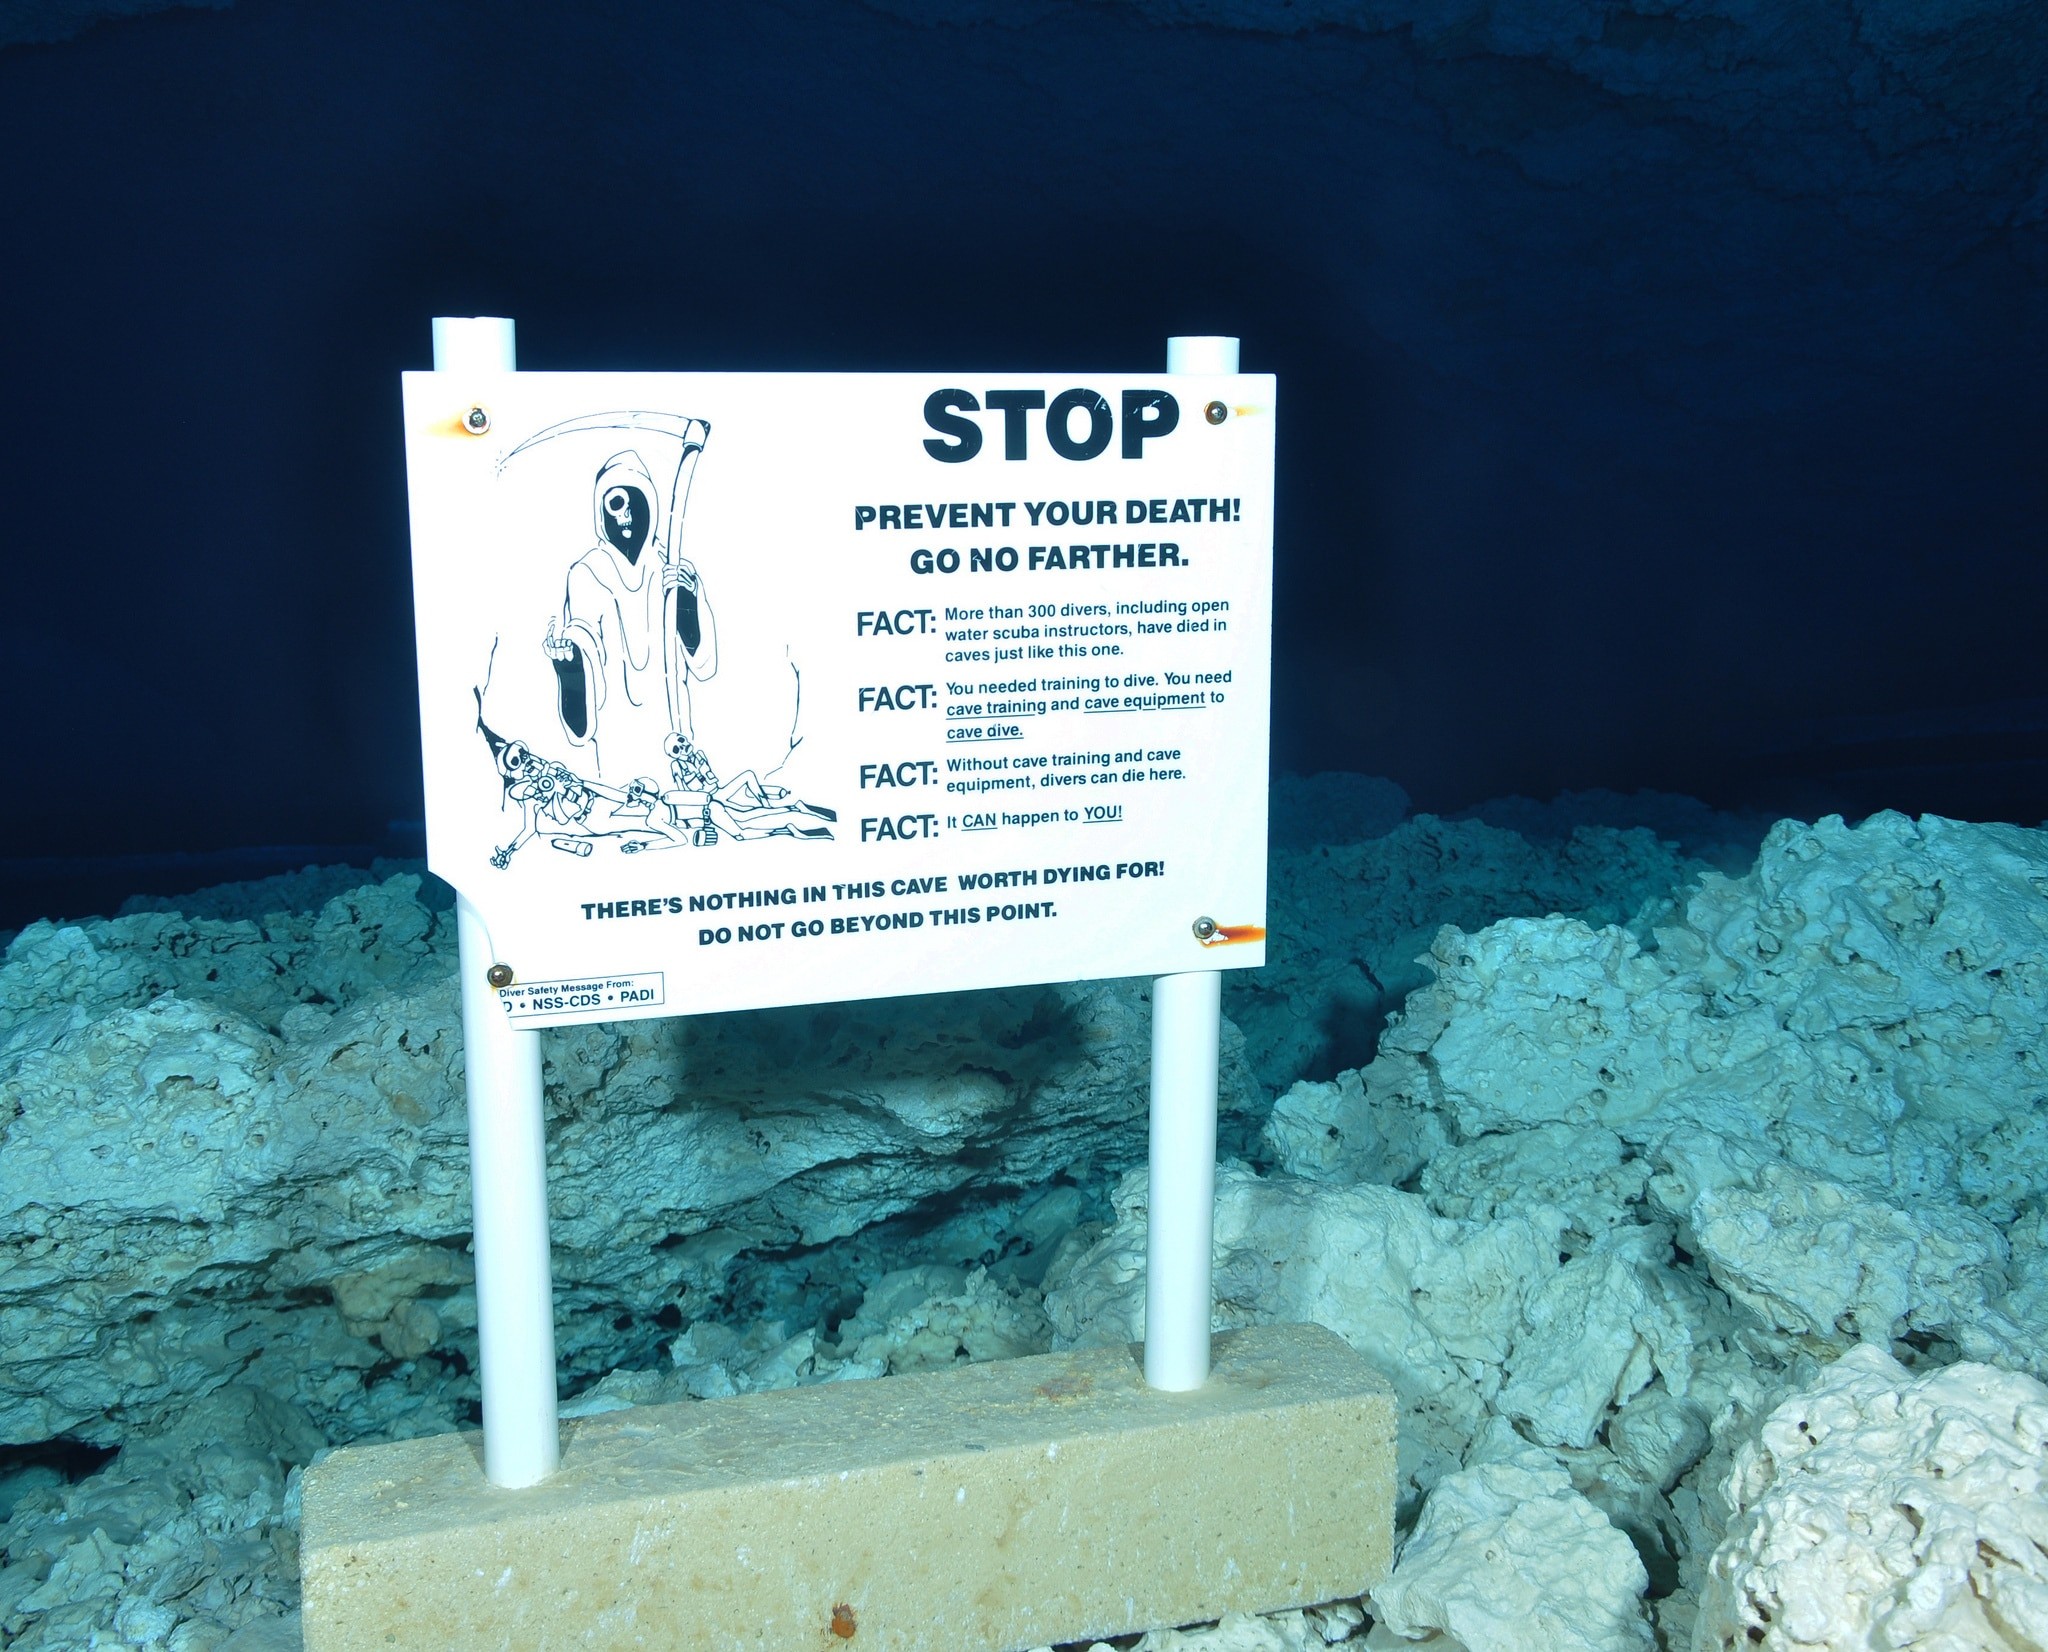 Cave Entrance Warning sign in Cenote cavern